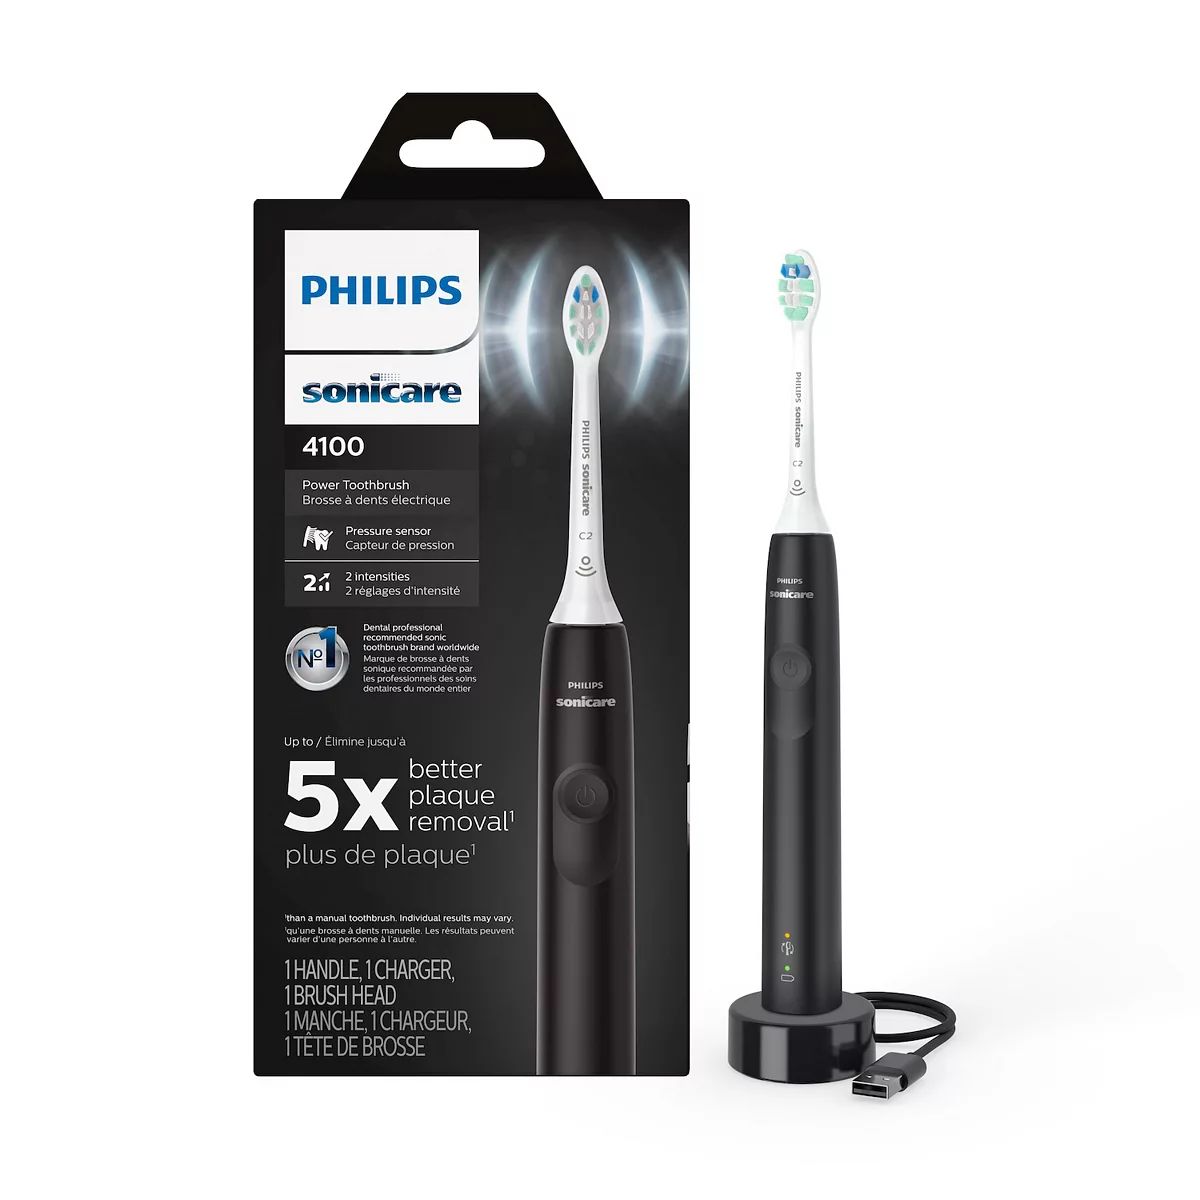 Philips Sonicare 4100 Rechargeable Electric Toothbrush with Pressure Sensor | Kohl's